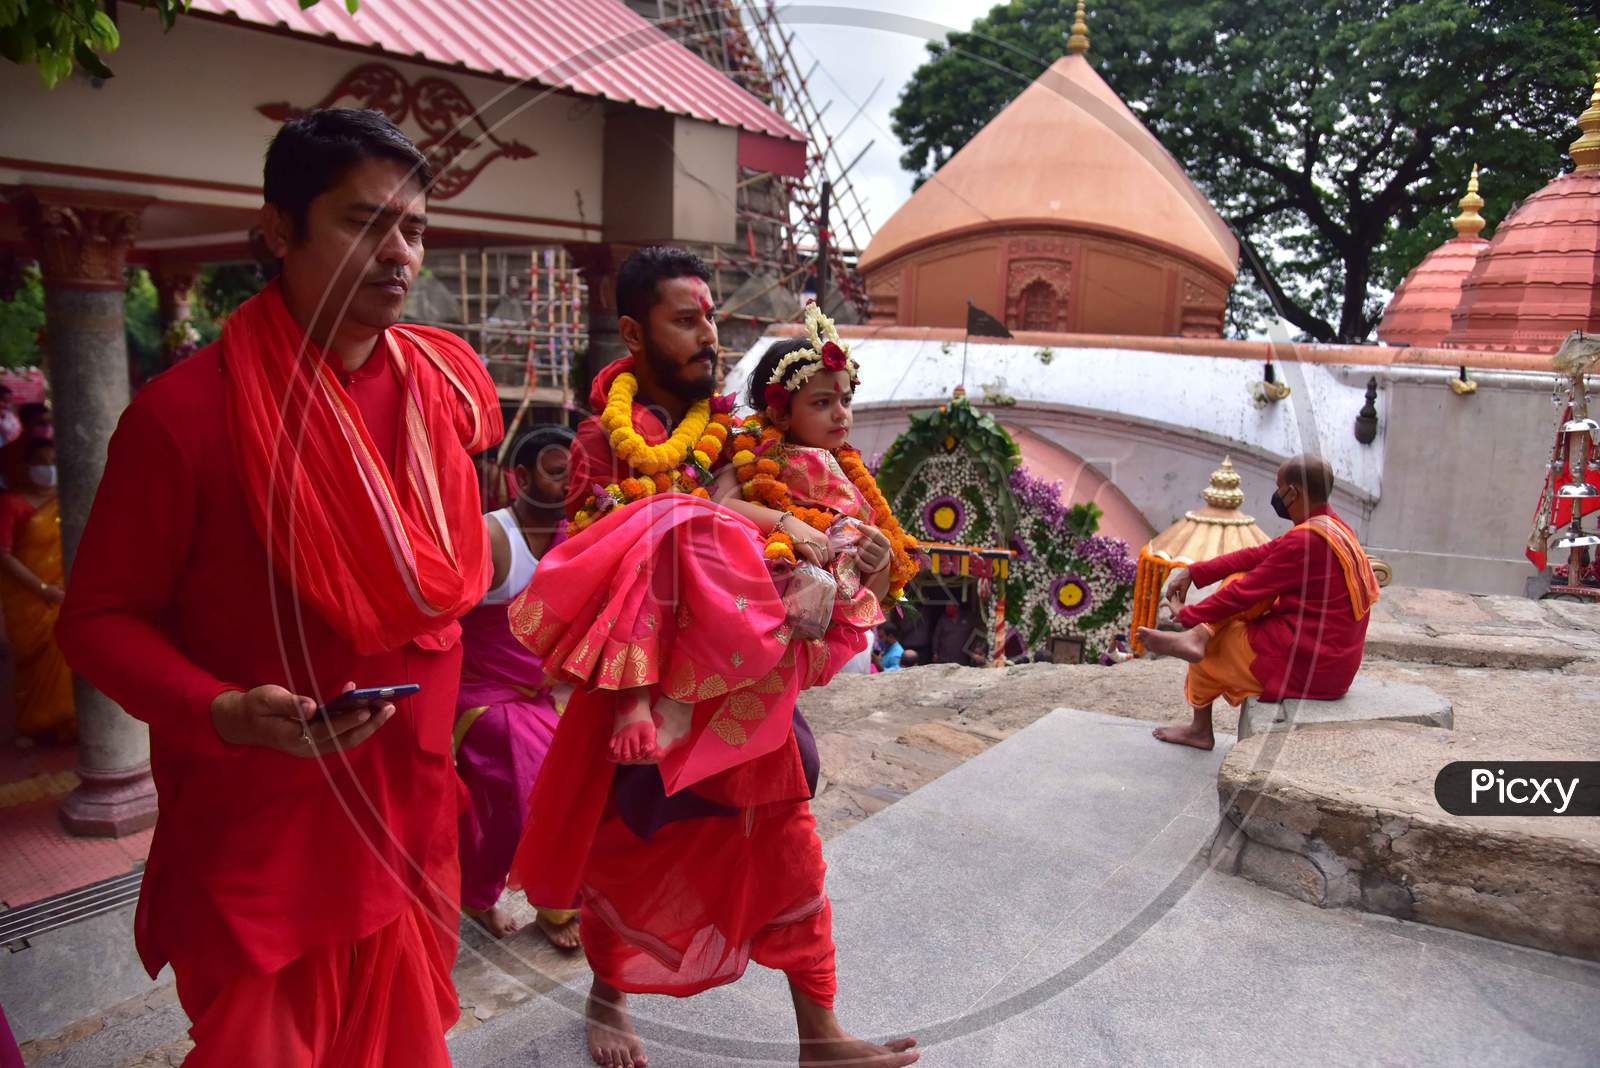 Hindu devotees carry girls dressed as the Hindu goddess Durga for the "Kumari" puja rituals during the Durga Puja festival at the Kamakhya Temple in Guwahati on oct 25,2020.